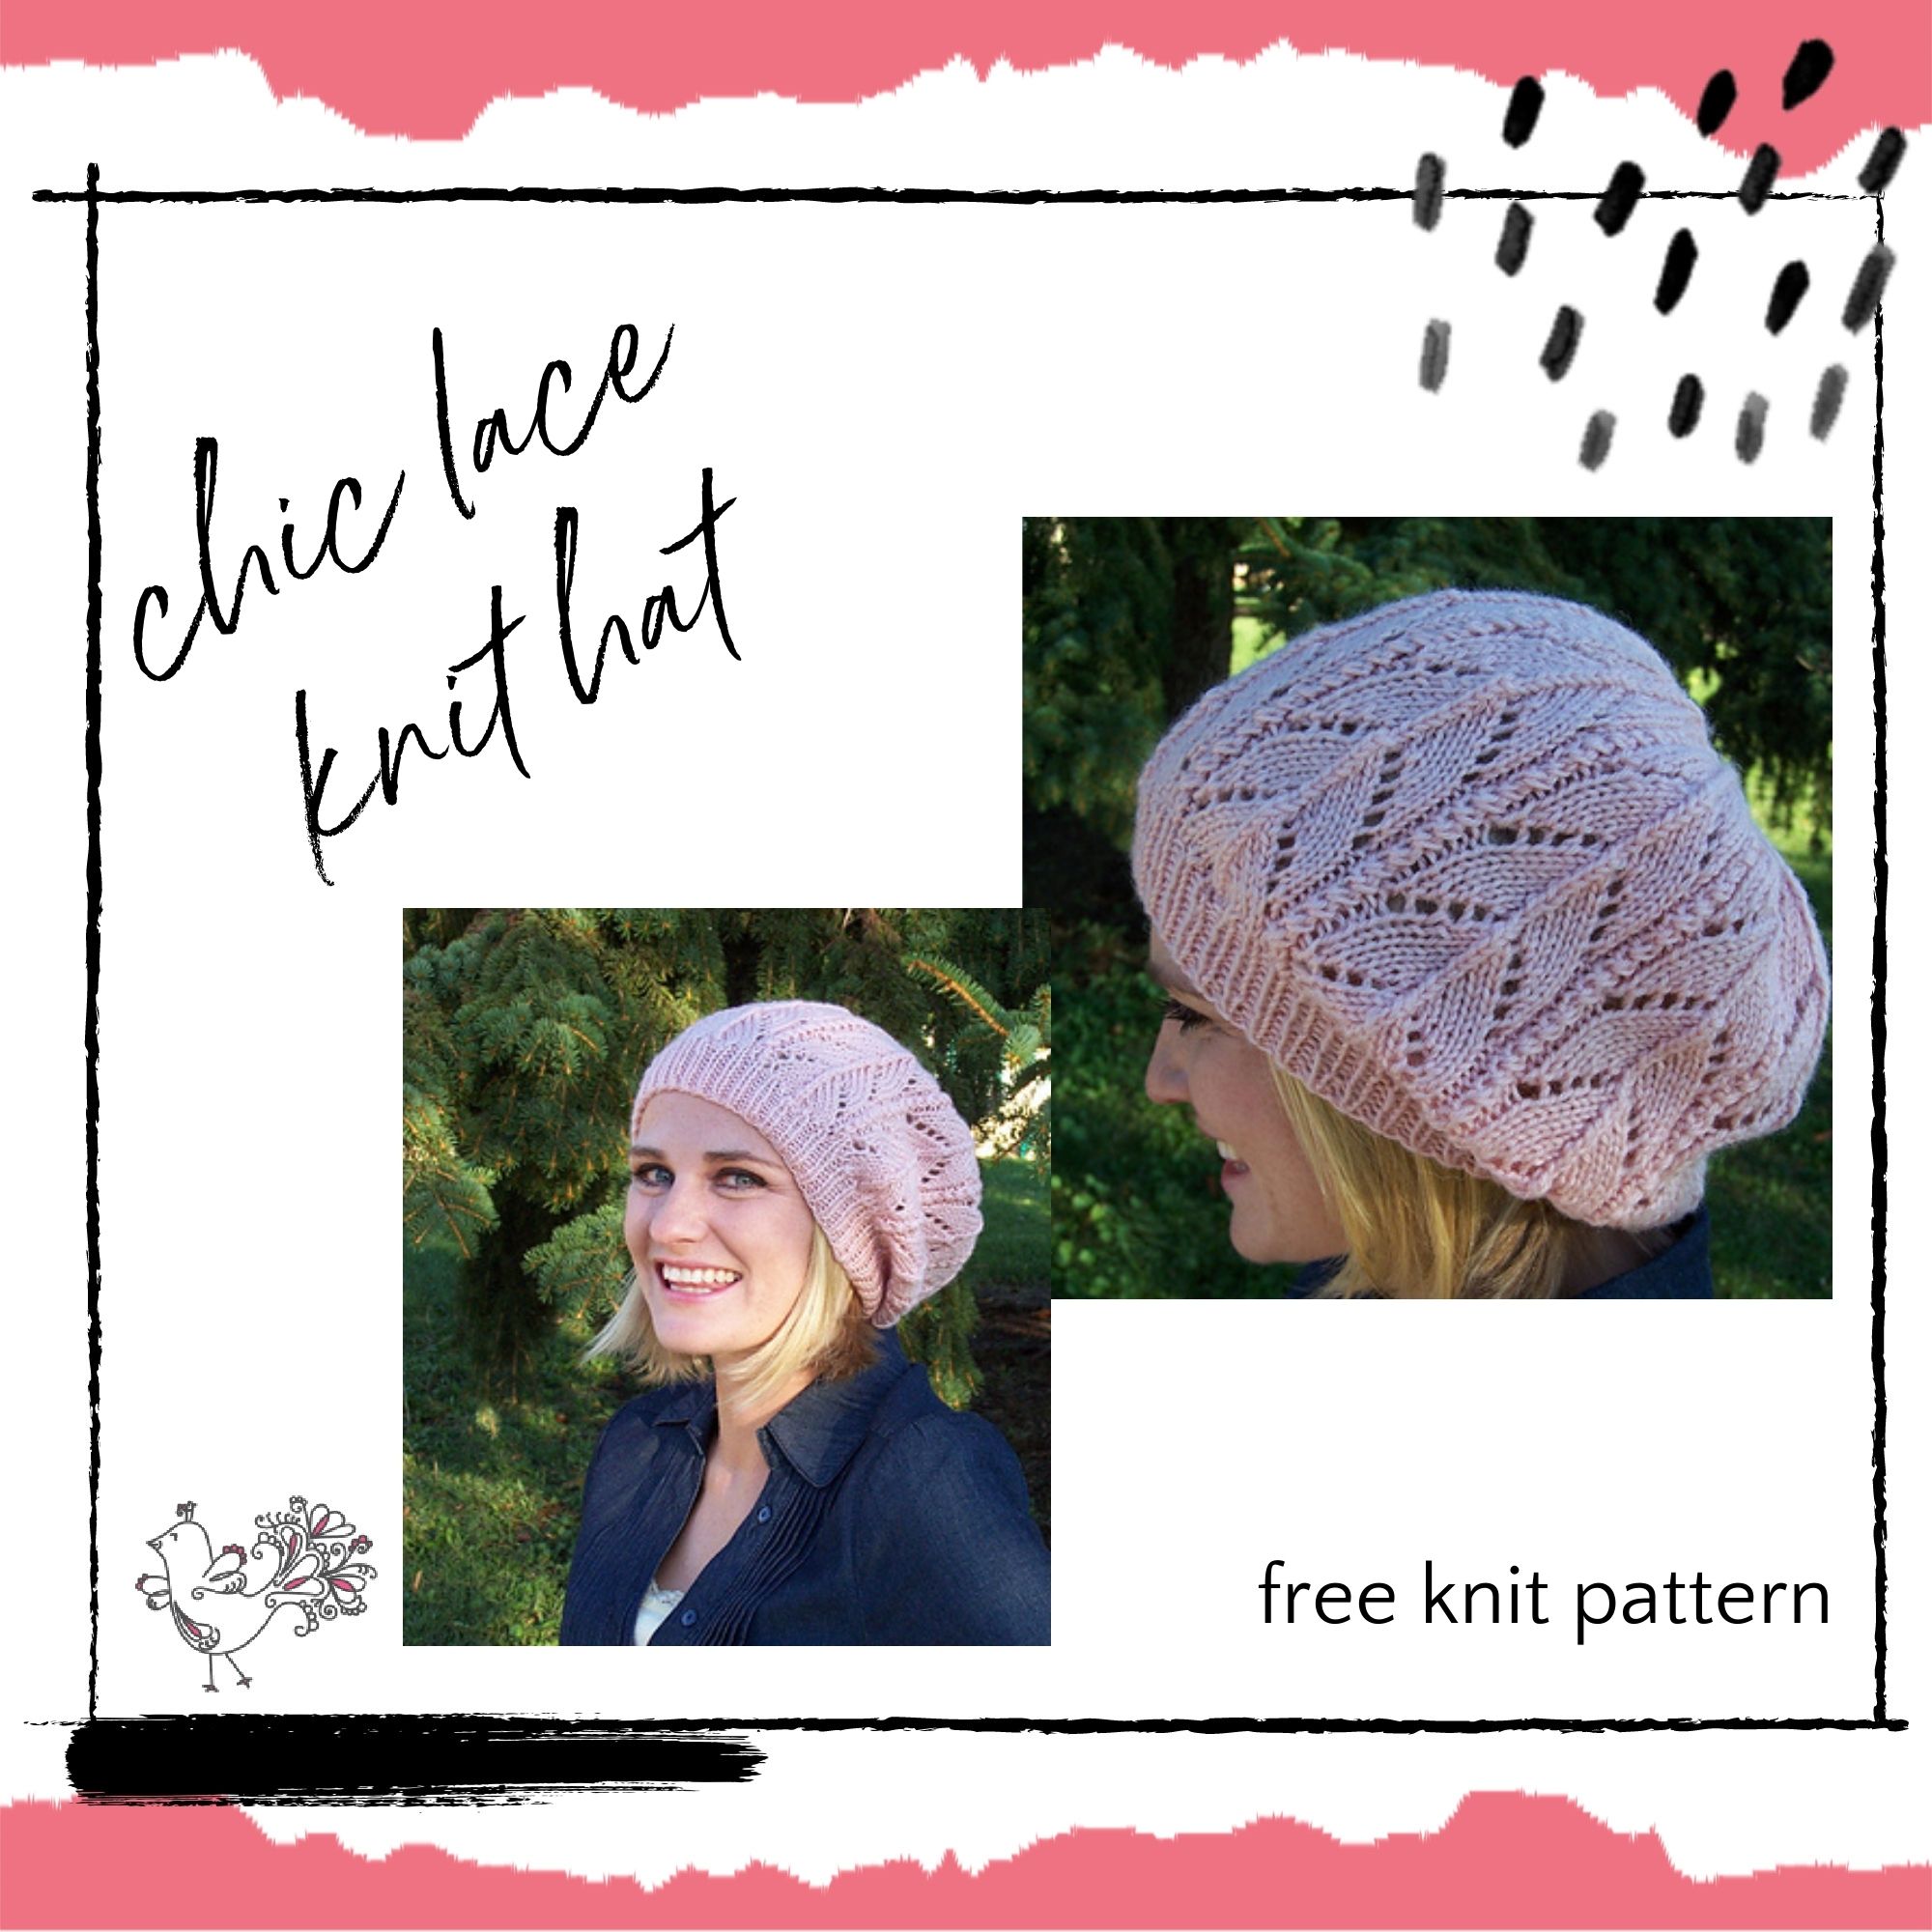 A collage of two images of a woman wearing a pink knit lace hat, with text labels "chic knit lace hat" and "free knit pattern," against a decorative background with floral and dotted elements. -Marly Bird